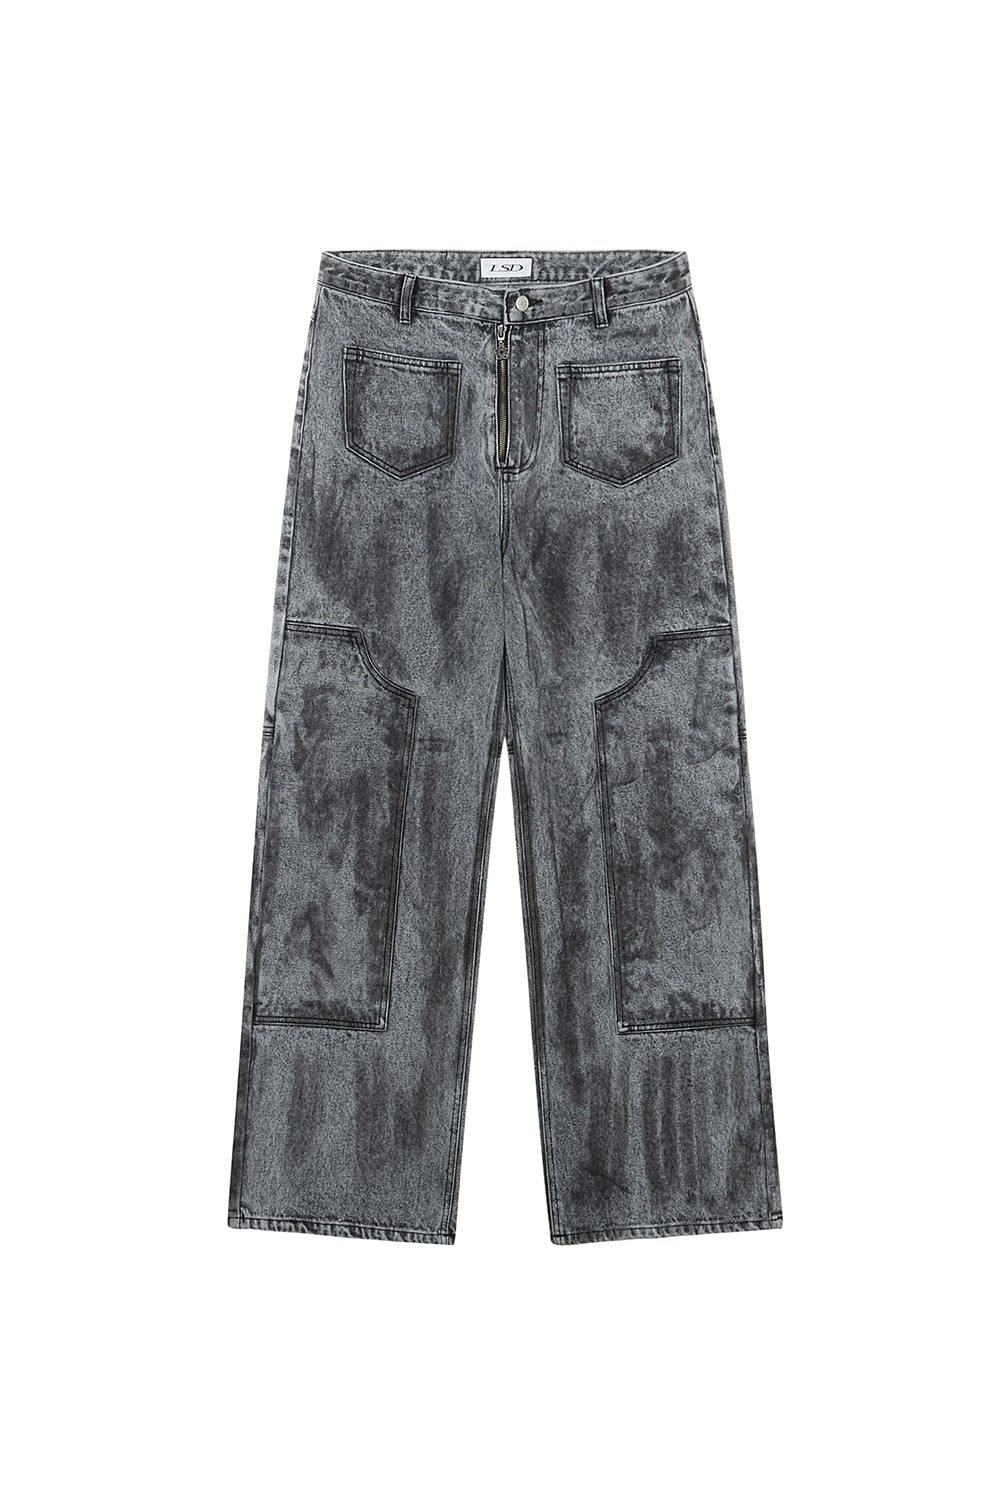 [Runway] Dirty Washed Carpenter Pants_Dusty Black